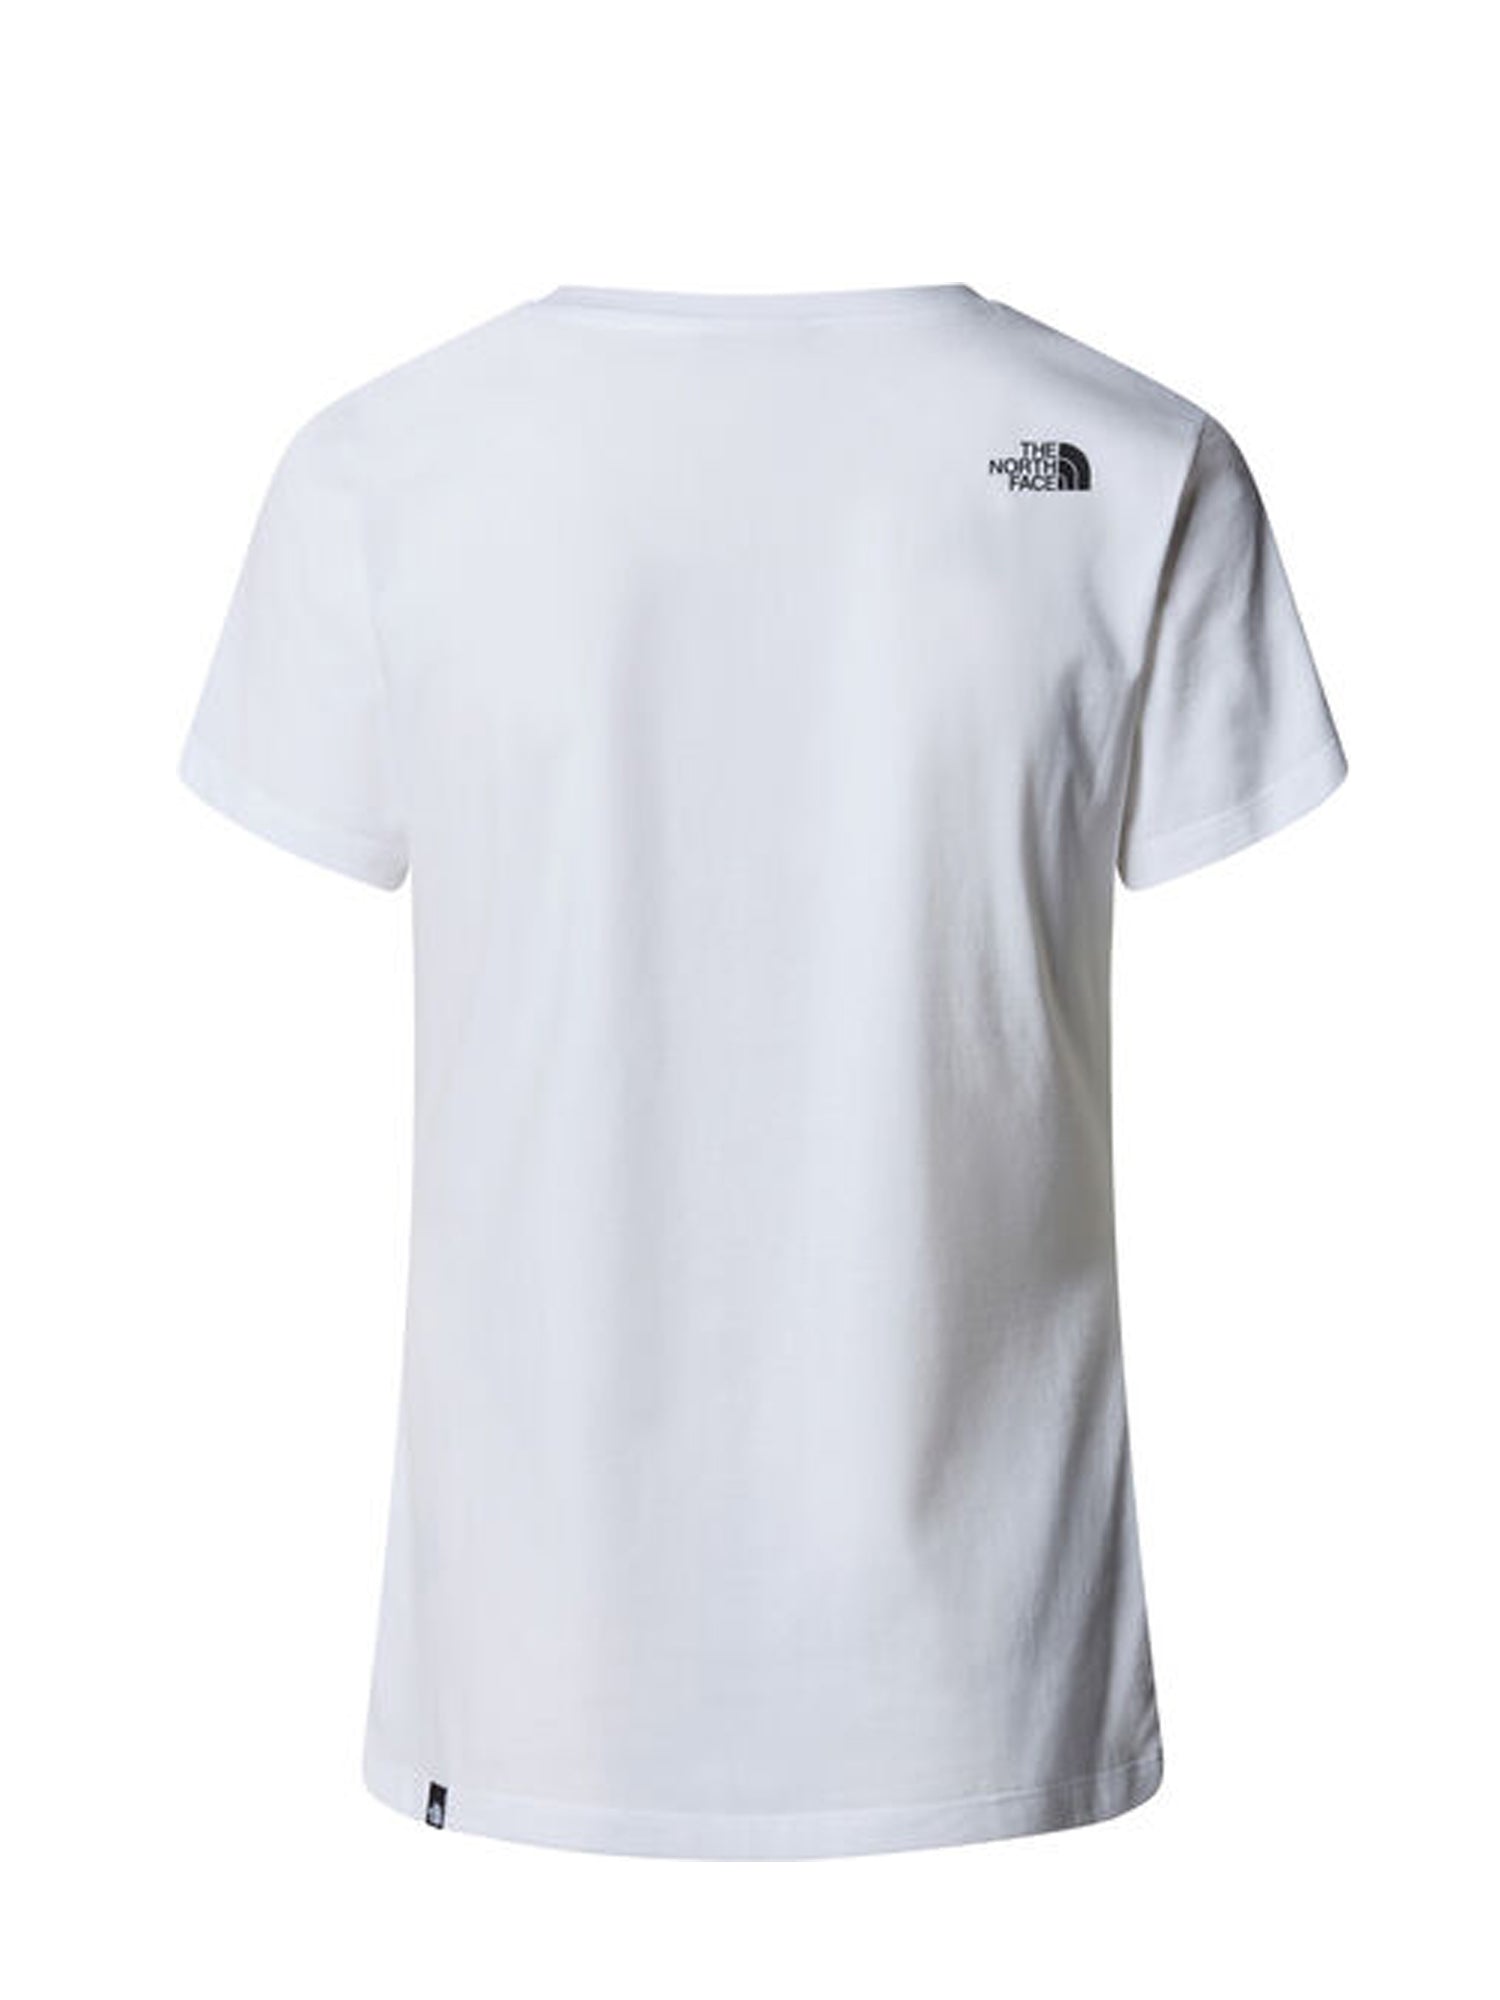 THE NORTH FACE T-SHIRT SLIM SIMPLE DOME BIANCO